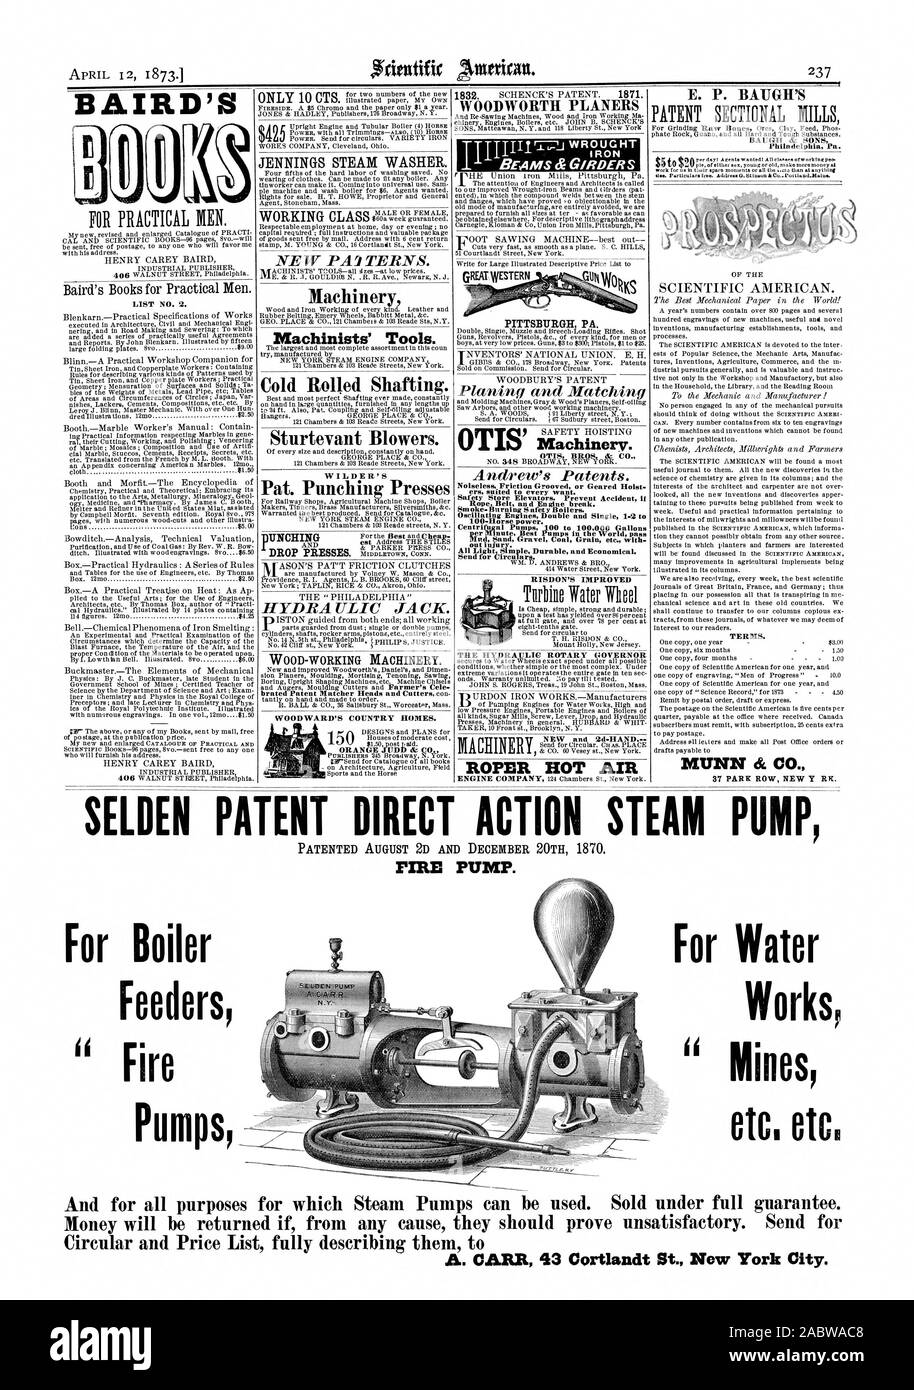 SELDEN PATENT DIRECT ACTION STEAM PUMP FIRE PUMP. BAIRD'S Baird's Books for Practical Men. LIST NO. 2. ONLY 10 CTS JENNINGS STEAM WASHER. WORKING CLASS Machinery Machinists' Tools. Cold Rolled Shafting. Sturtevant Blowers. WILDER'S Pat. Punching Presses WOOD-WORKING MACHINERY. WOODWARD'S COUNTRY HOMES. WOODWORTH PLANERS BEAMS &GIRDERS PITTSBURGH PA. Machinery. OTIS BROS. & CO. Noiseless Friction Grooved or Geared Holst ers suited to every want. Safety Store Elevators. Prevent Accident  Smoke- Burning Safety  Boilers. Oscillating Engines Double and Single 1-2 to 100-Horse power. Centrifugal Stock Photo